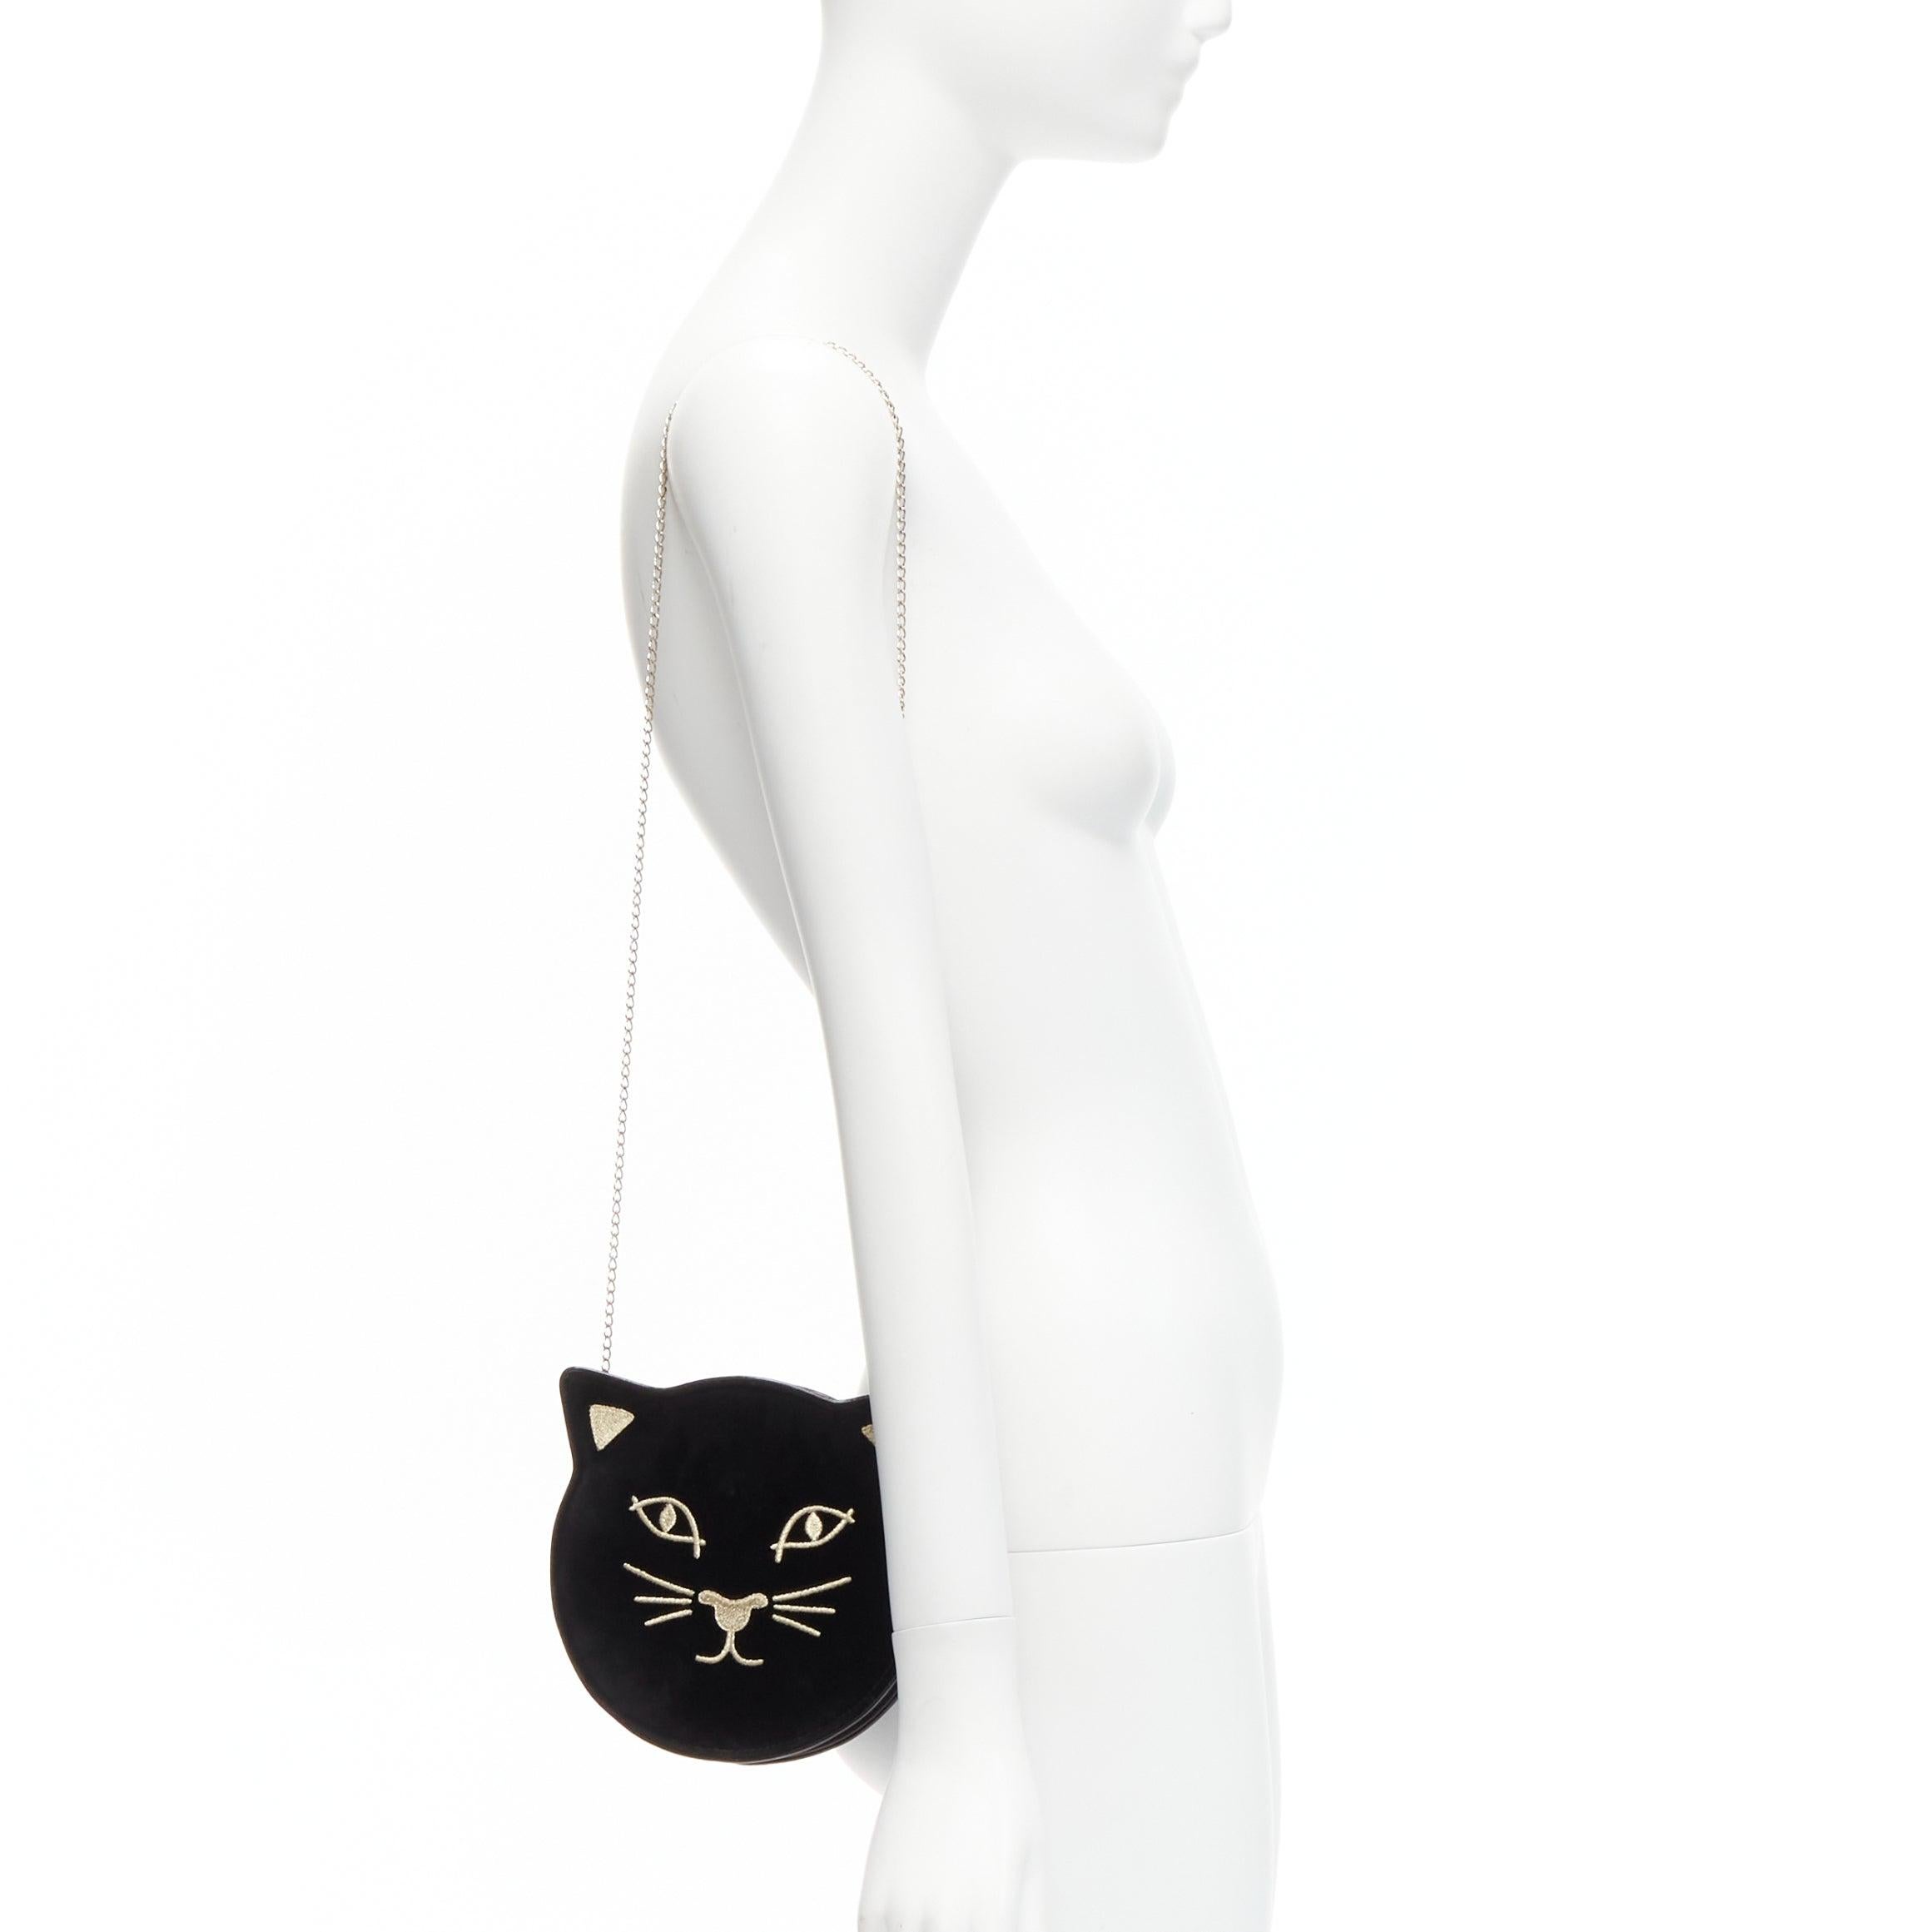 CHARLOTTE OLYMPIA Kitty black velvet gold embroidered crossbody bag
Reference: BSHW/A00066
Brand: Charlotte Olympia
Collection: Kitty
Material: Velvet
Color: Black, Gold
Pattern: Solid
Closure: Zip
Lining: Beige Fabric
Extra Details: Signature